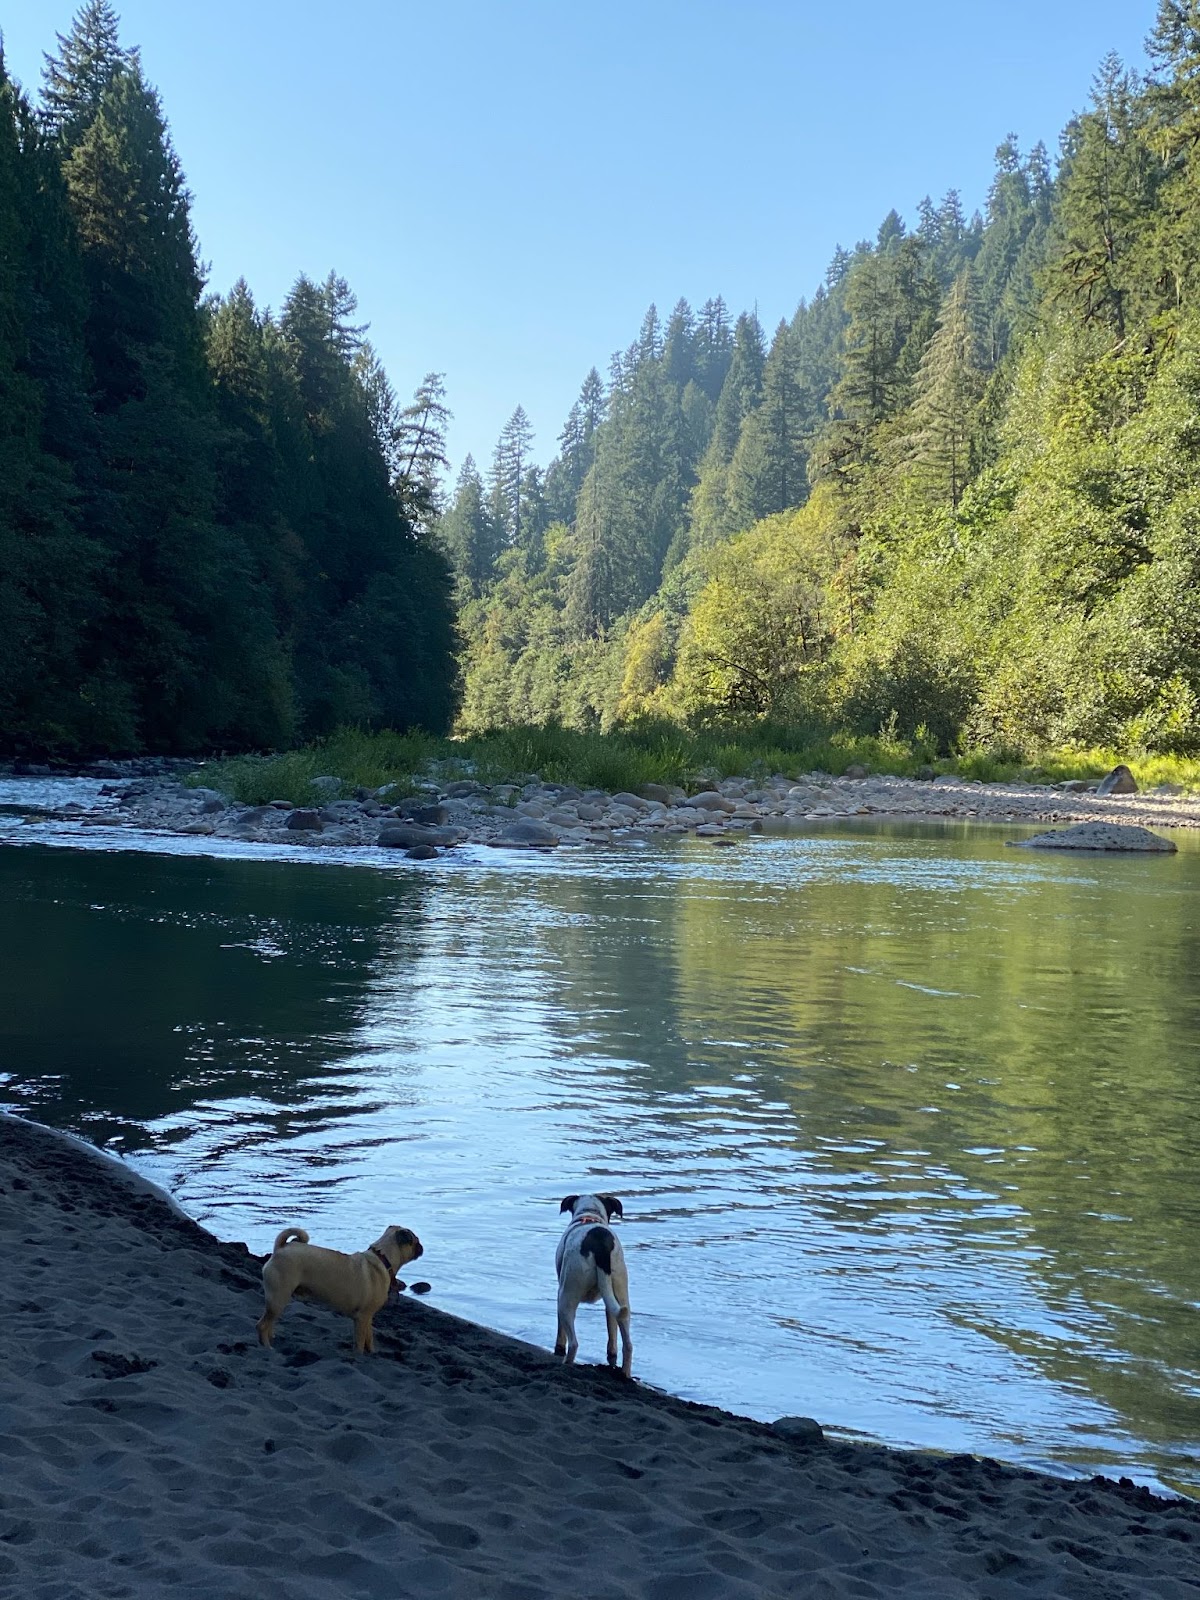 A sunny day with clear skies and two dogs standing on the river bank surrounded by forests